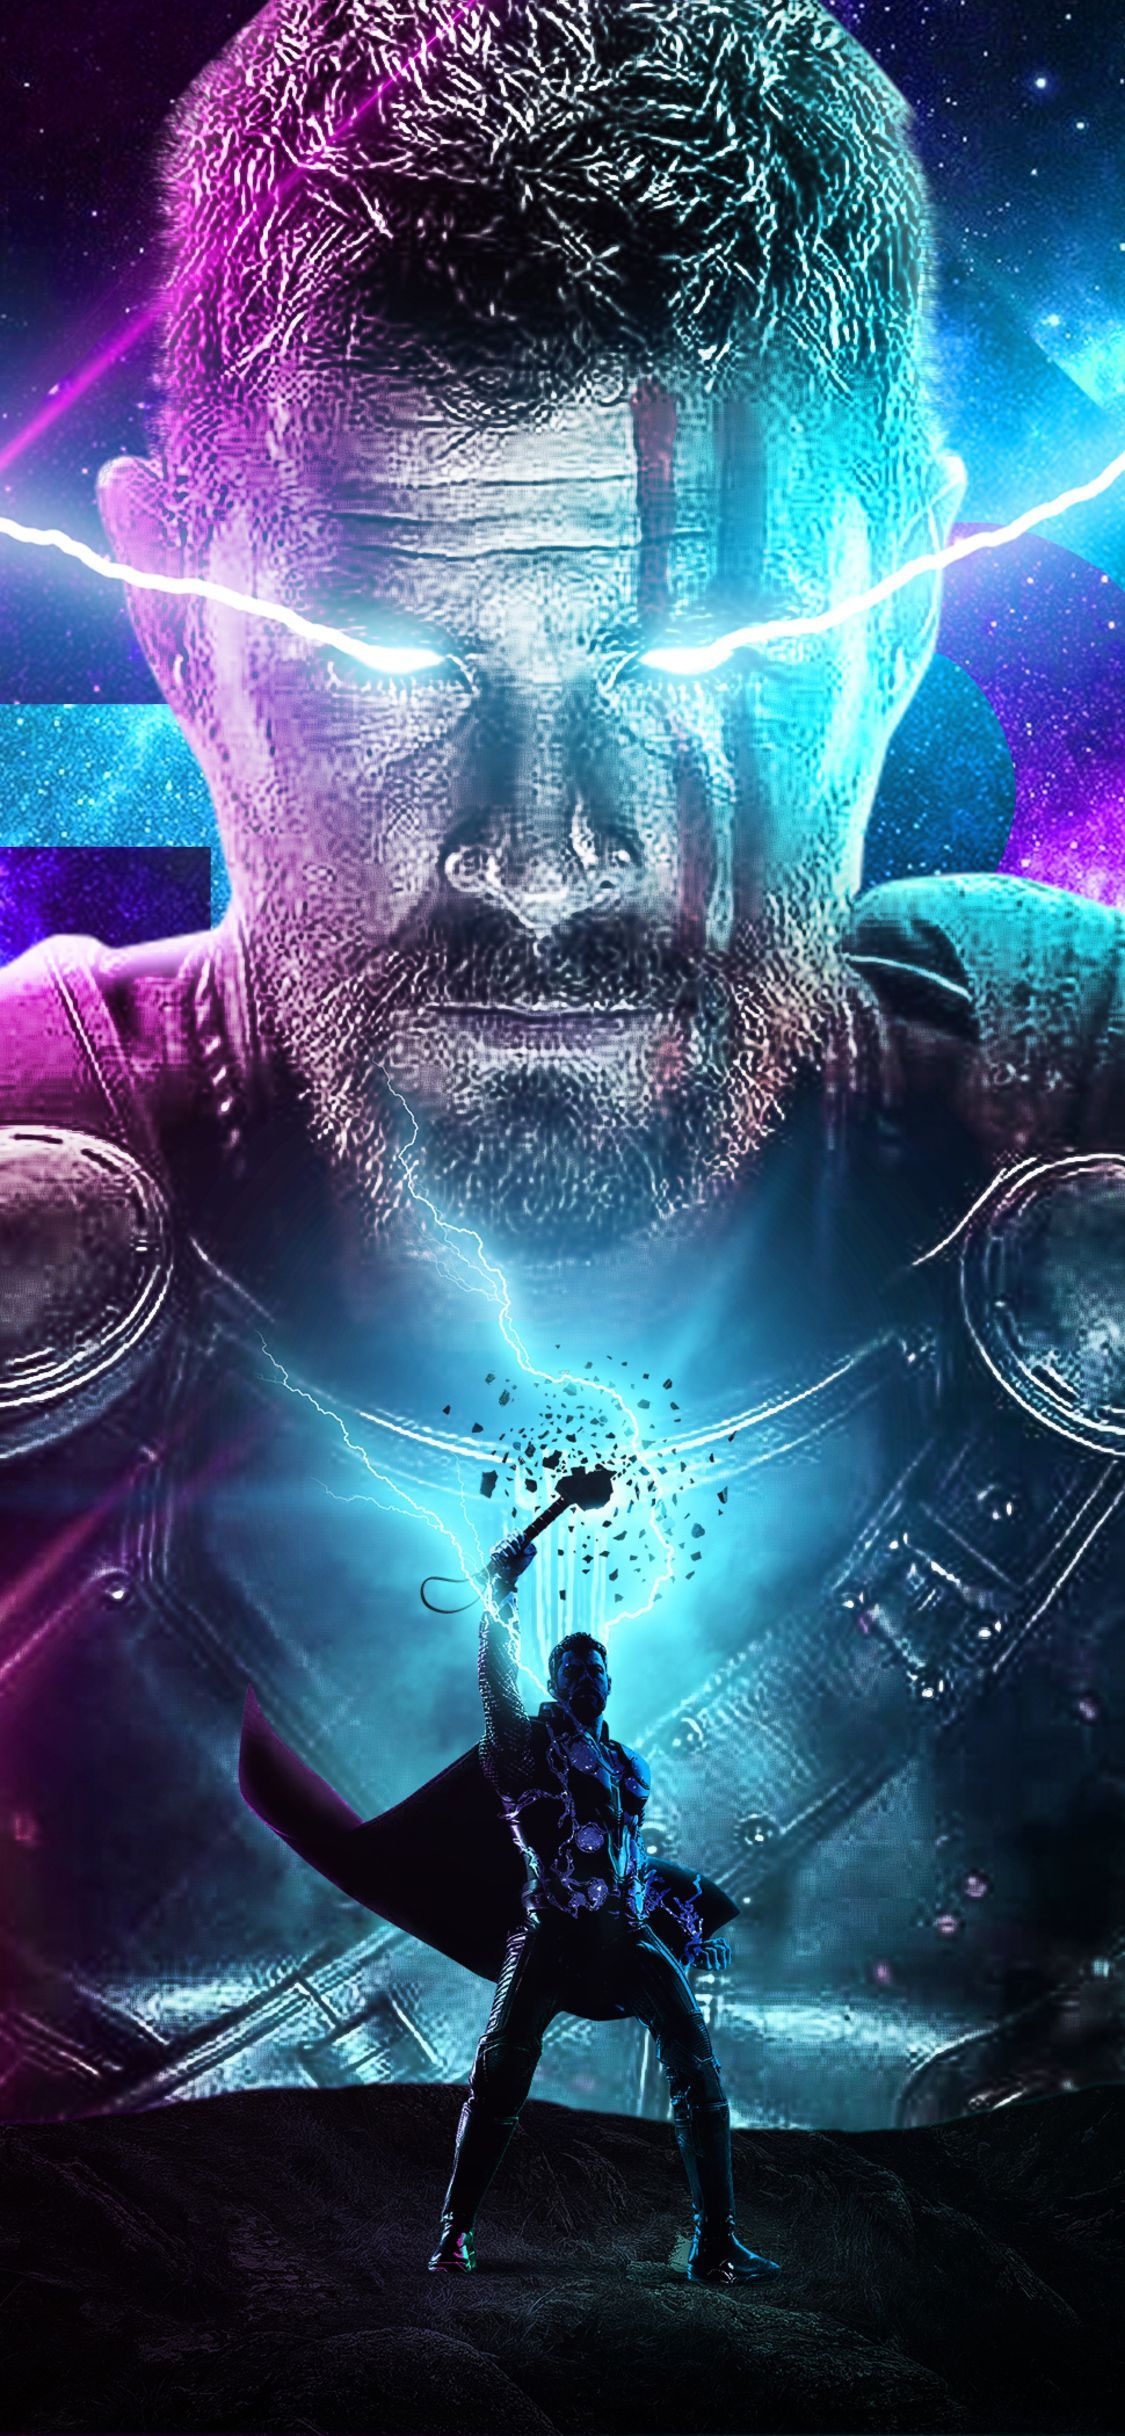 Thor Behance Art iPhone XS, iPhone iPhone X HD 4k Wallpaper, Image, Background, Photo and P. Marvel wallpaper, Thor wallpaper, Marvel wallpaper hd